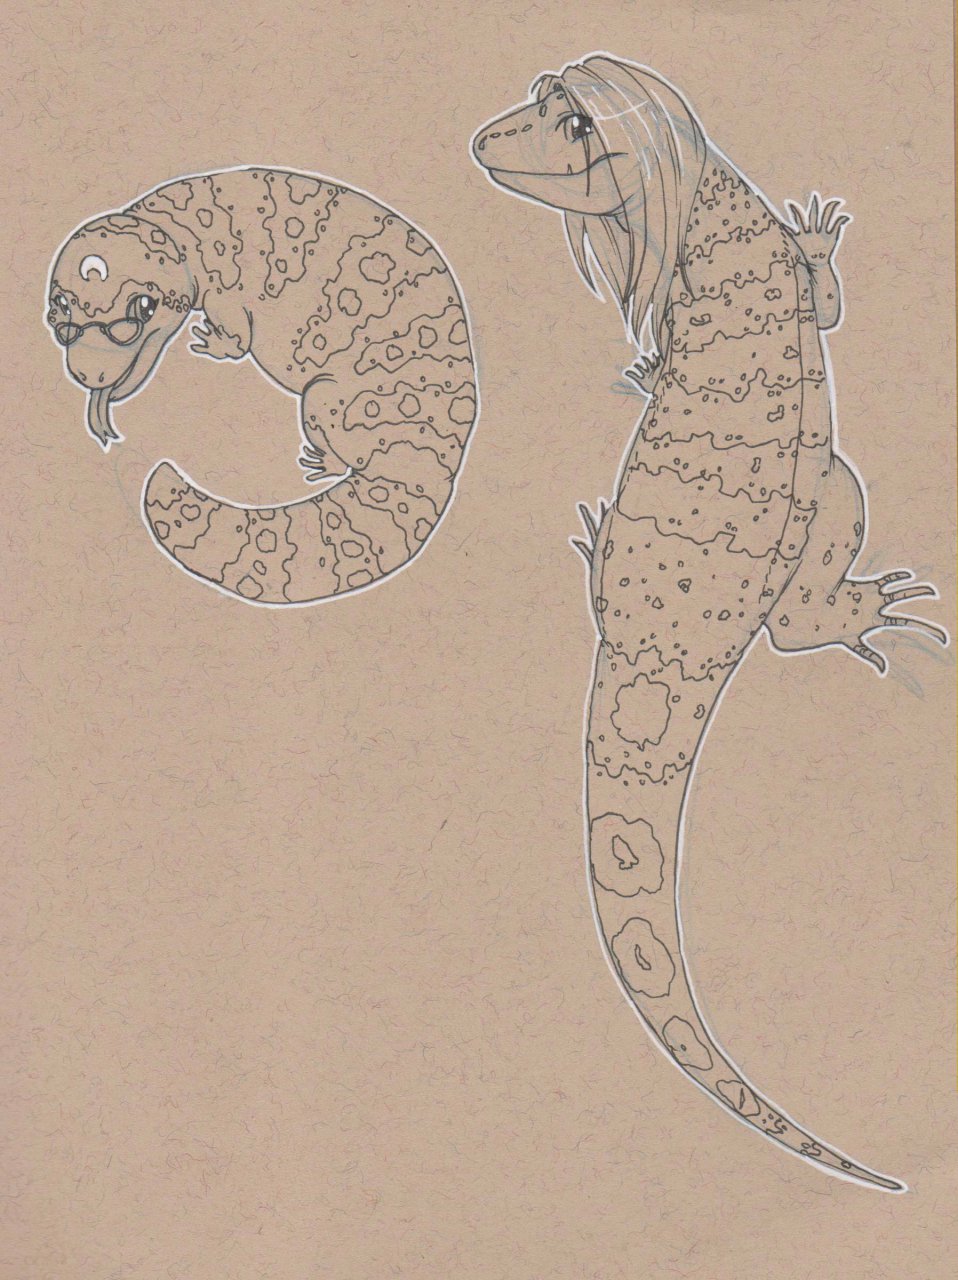 The Autistic Naturalist: How To Draw: Lizards and Snakes